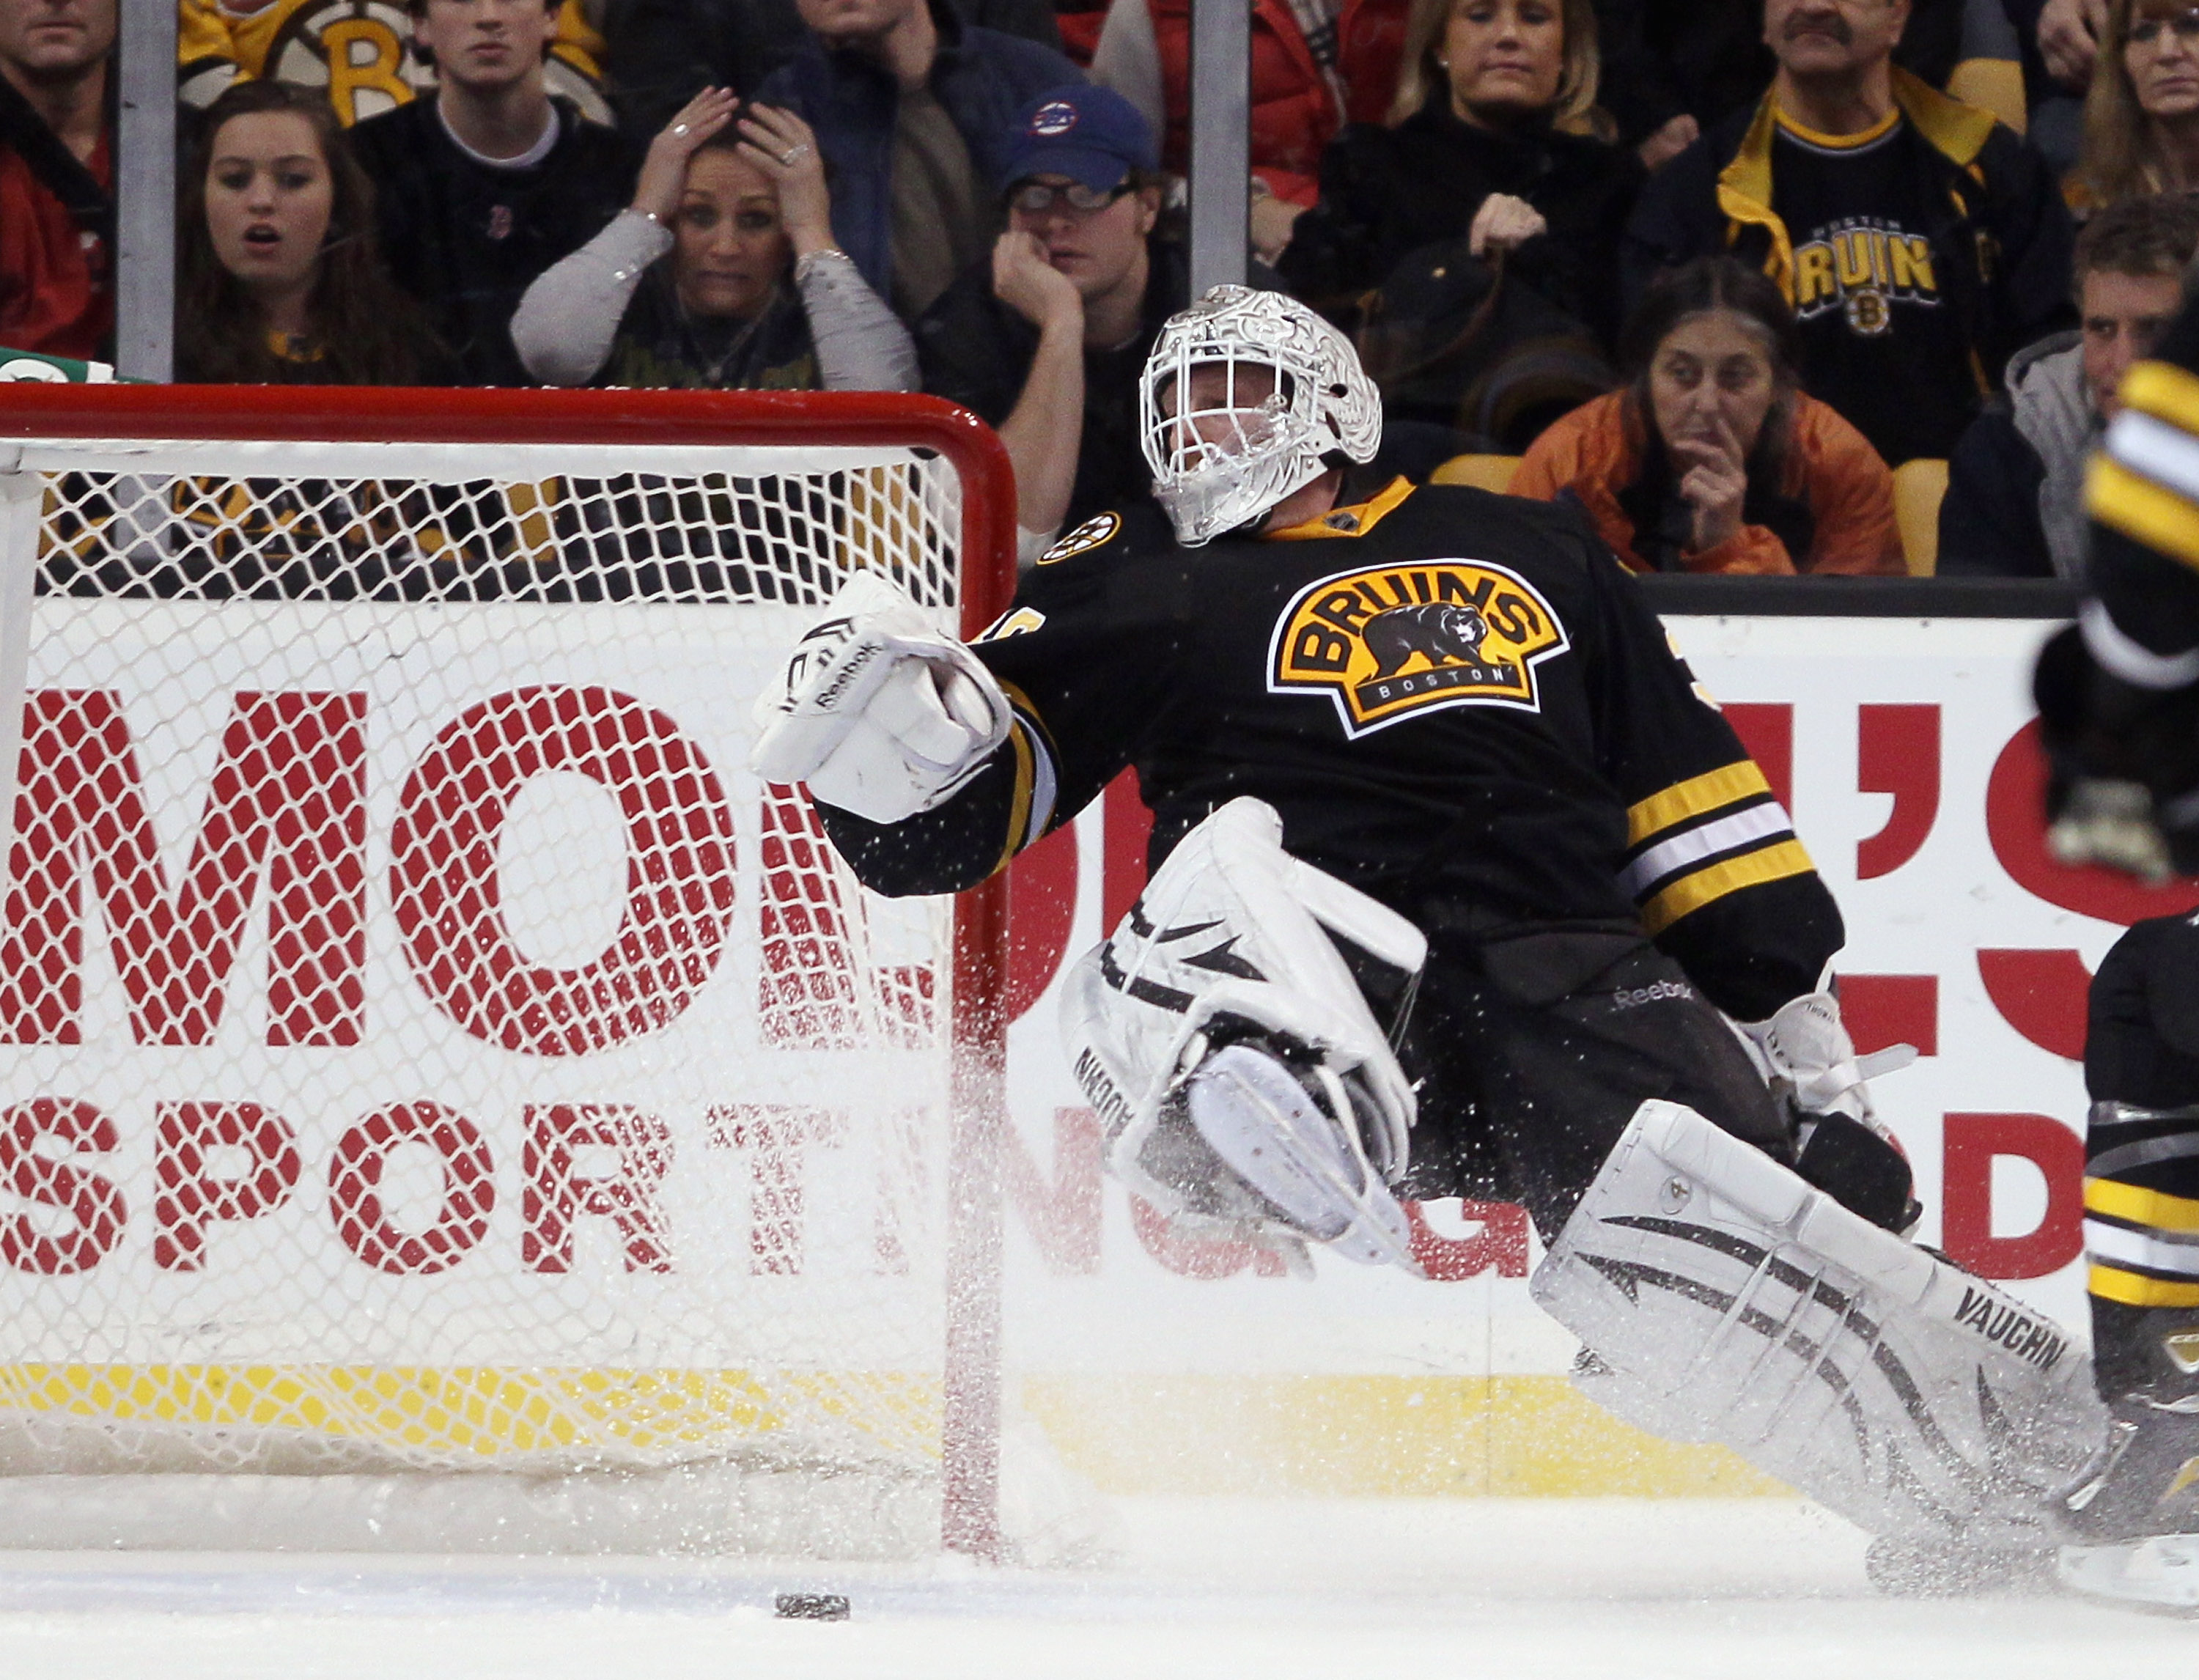 BOSTON, MA - DECEMBER 11:  Tim Thomas #30  of the Boston Bruins makes a save against the Philadelphia Flyers on December 11, 2010 at the TD Garden in Boston, Massachusetts. The Flyers defeated the Bruins 2-1 in overtime.  (Photo by Elsa/Getty Images)